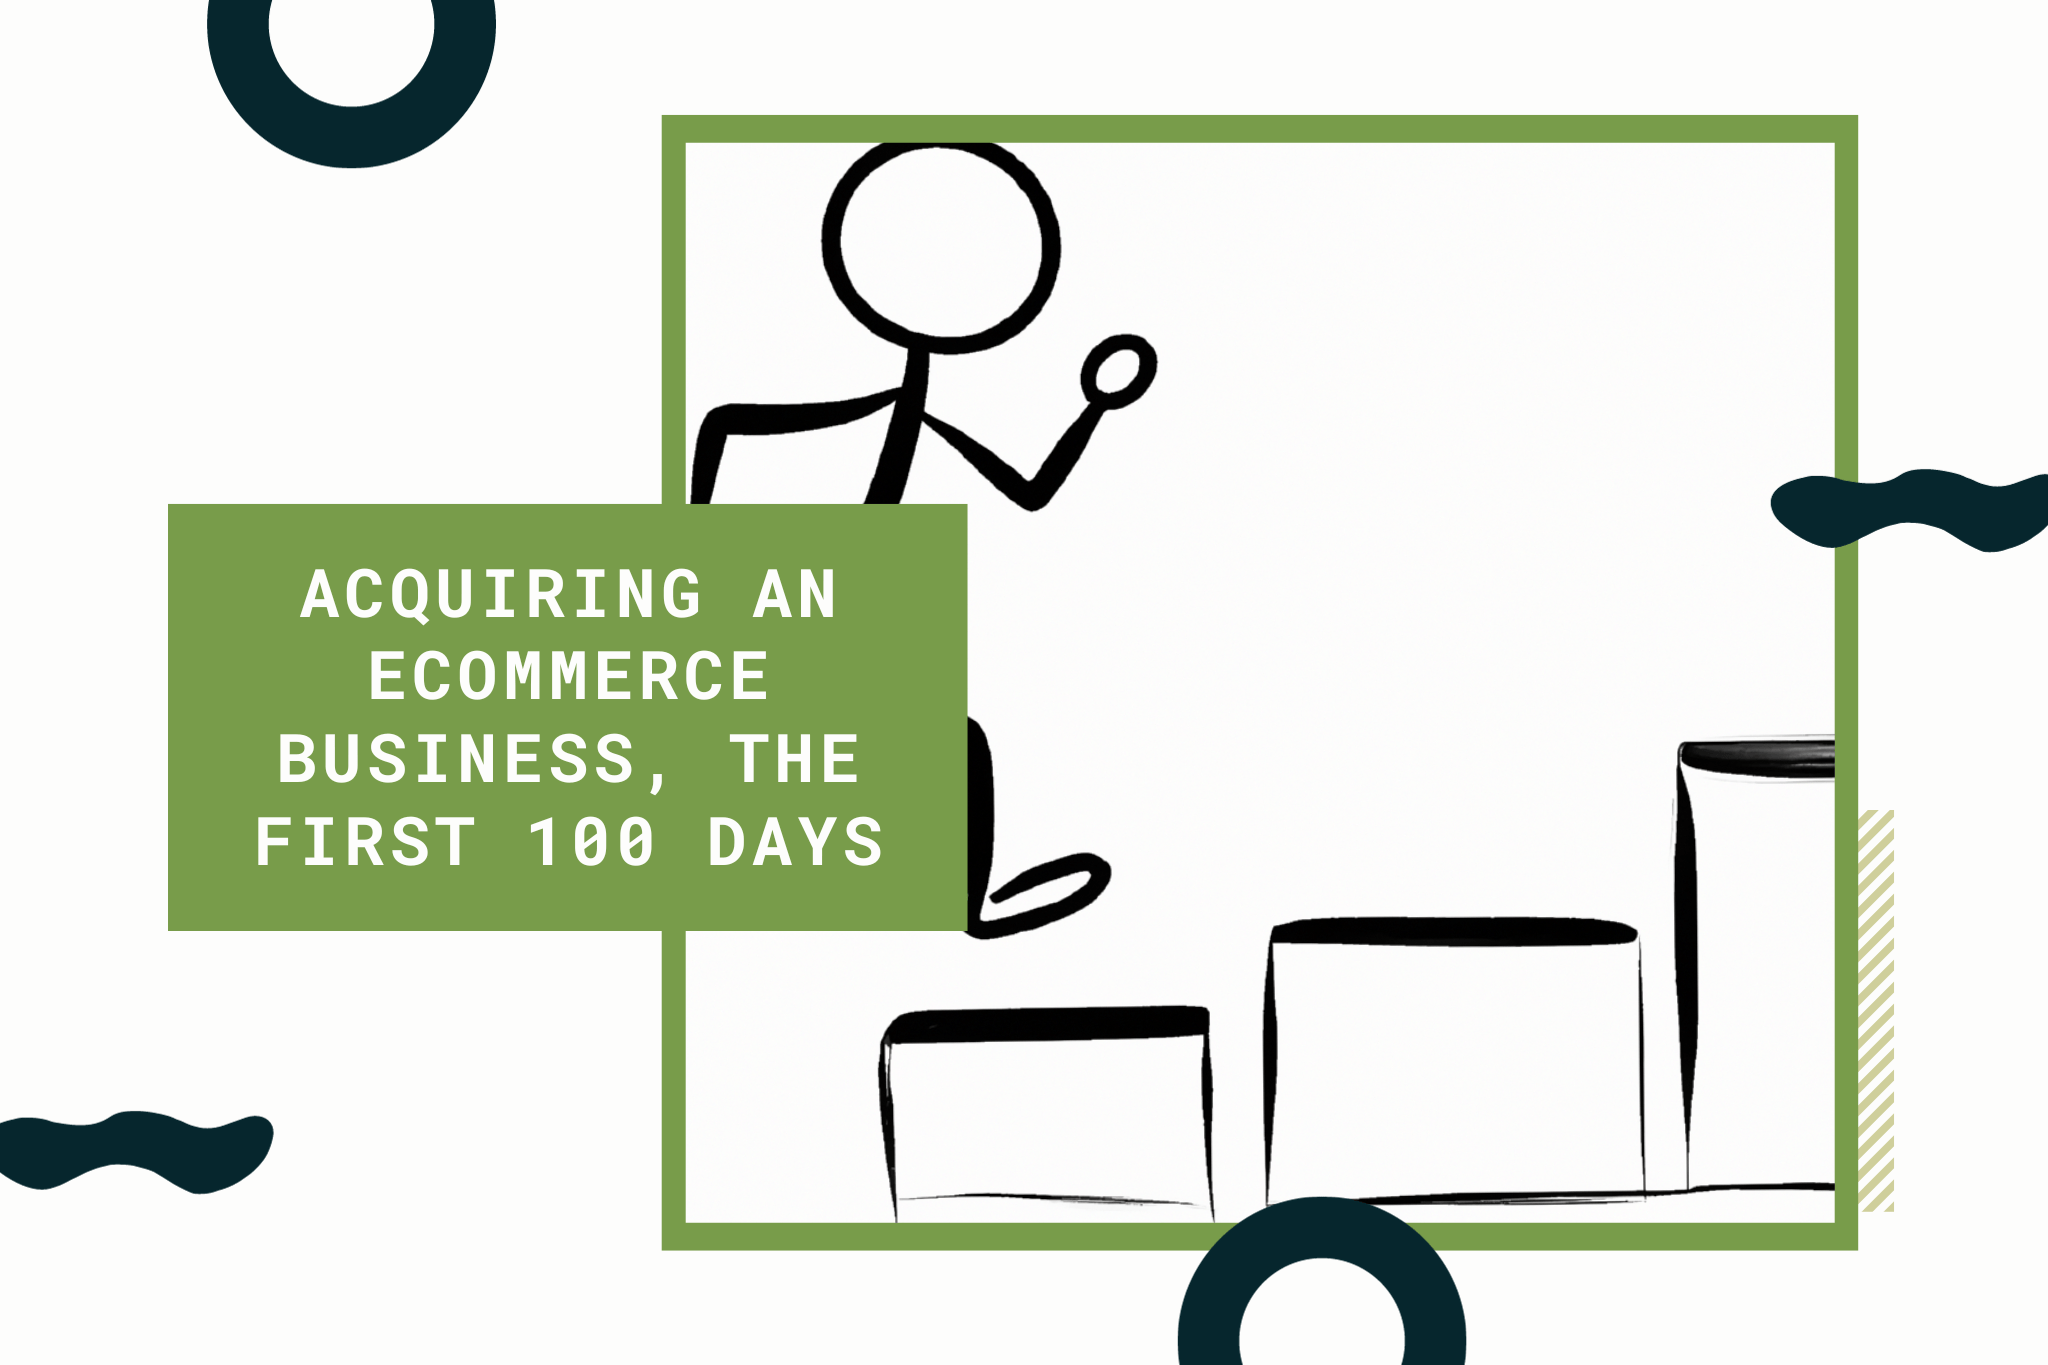 Framework for PE Firms: Acquiring an Ecommerce Business, the First 100 Days